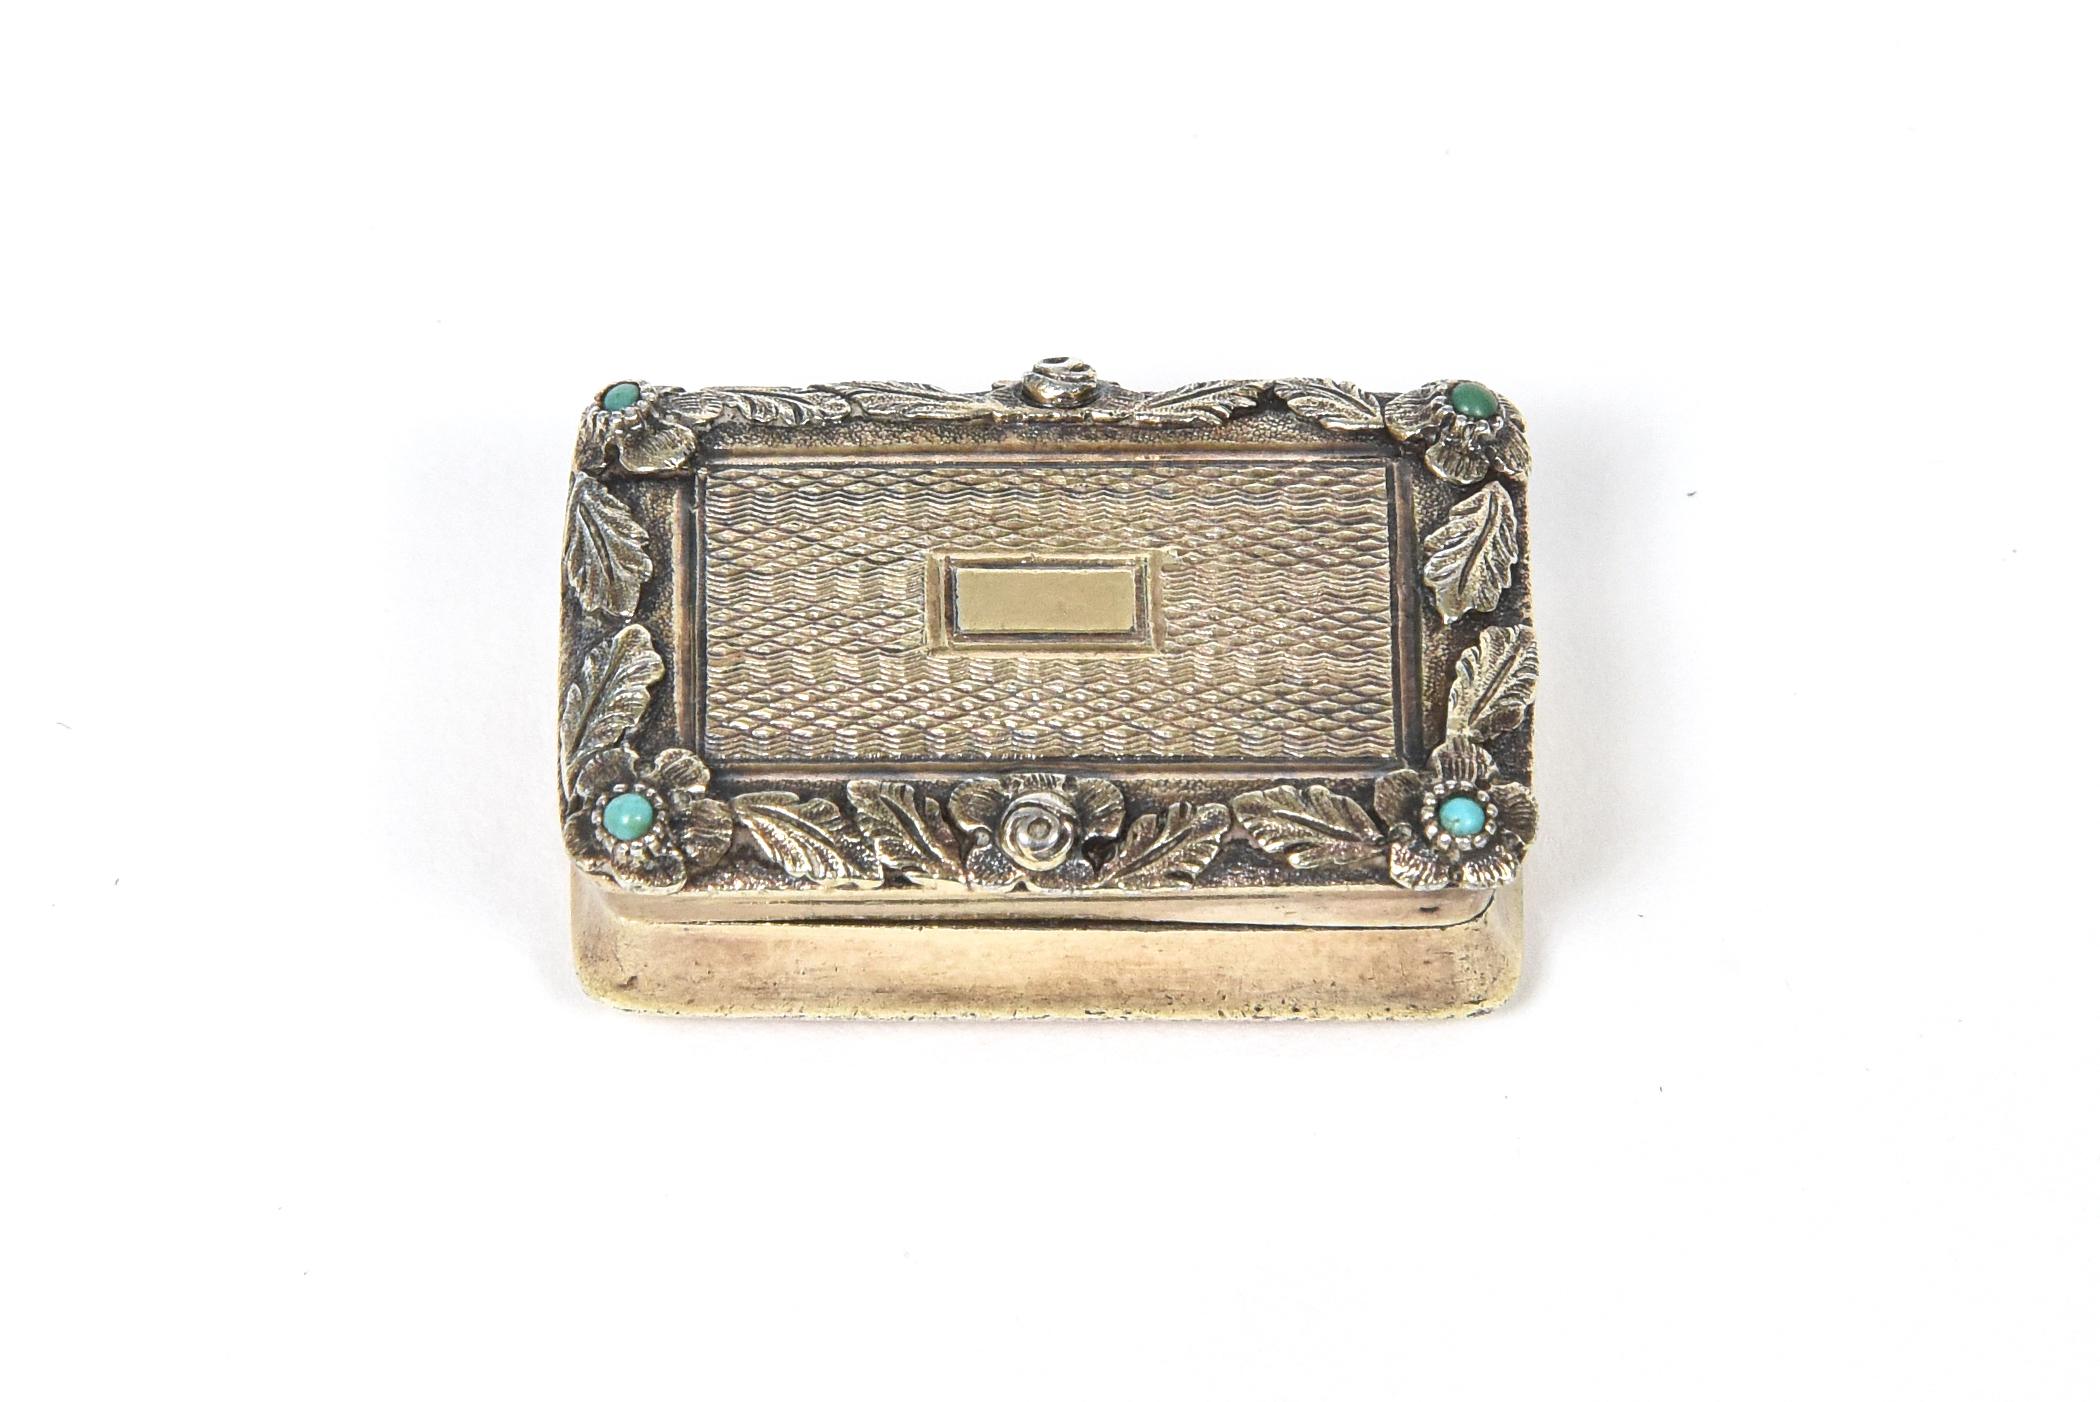 Highly stylized sterling silver vinaigrette, pill or snuff box by famed English silversmith William Simpson circa 1826 featuring a hand hammered raised floral design along the edges with 4 small turquoise accents. The top and bottom of the box are